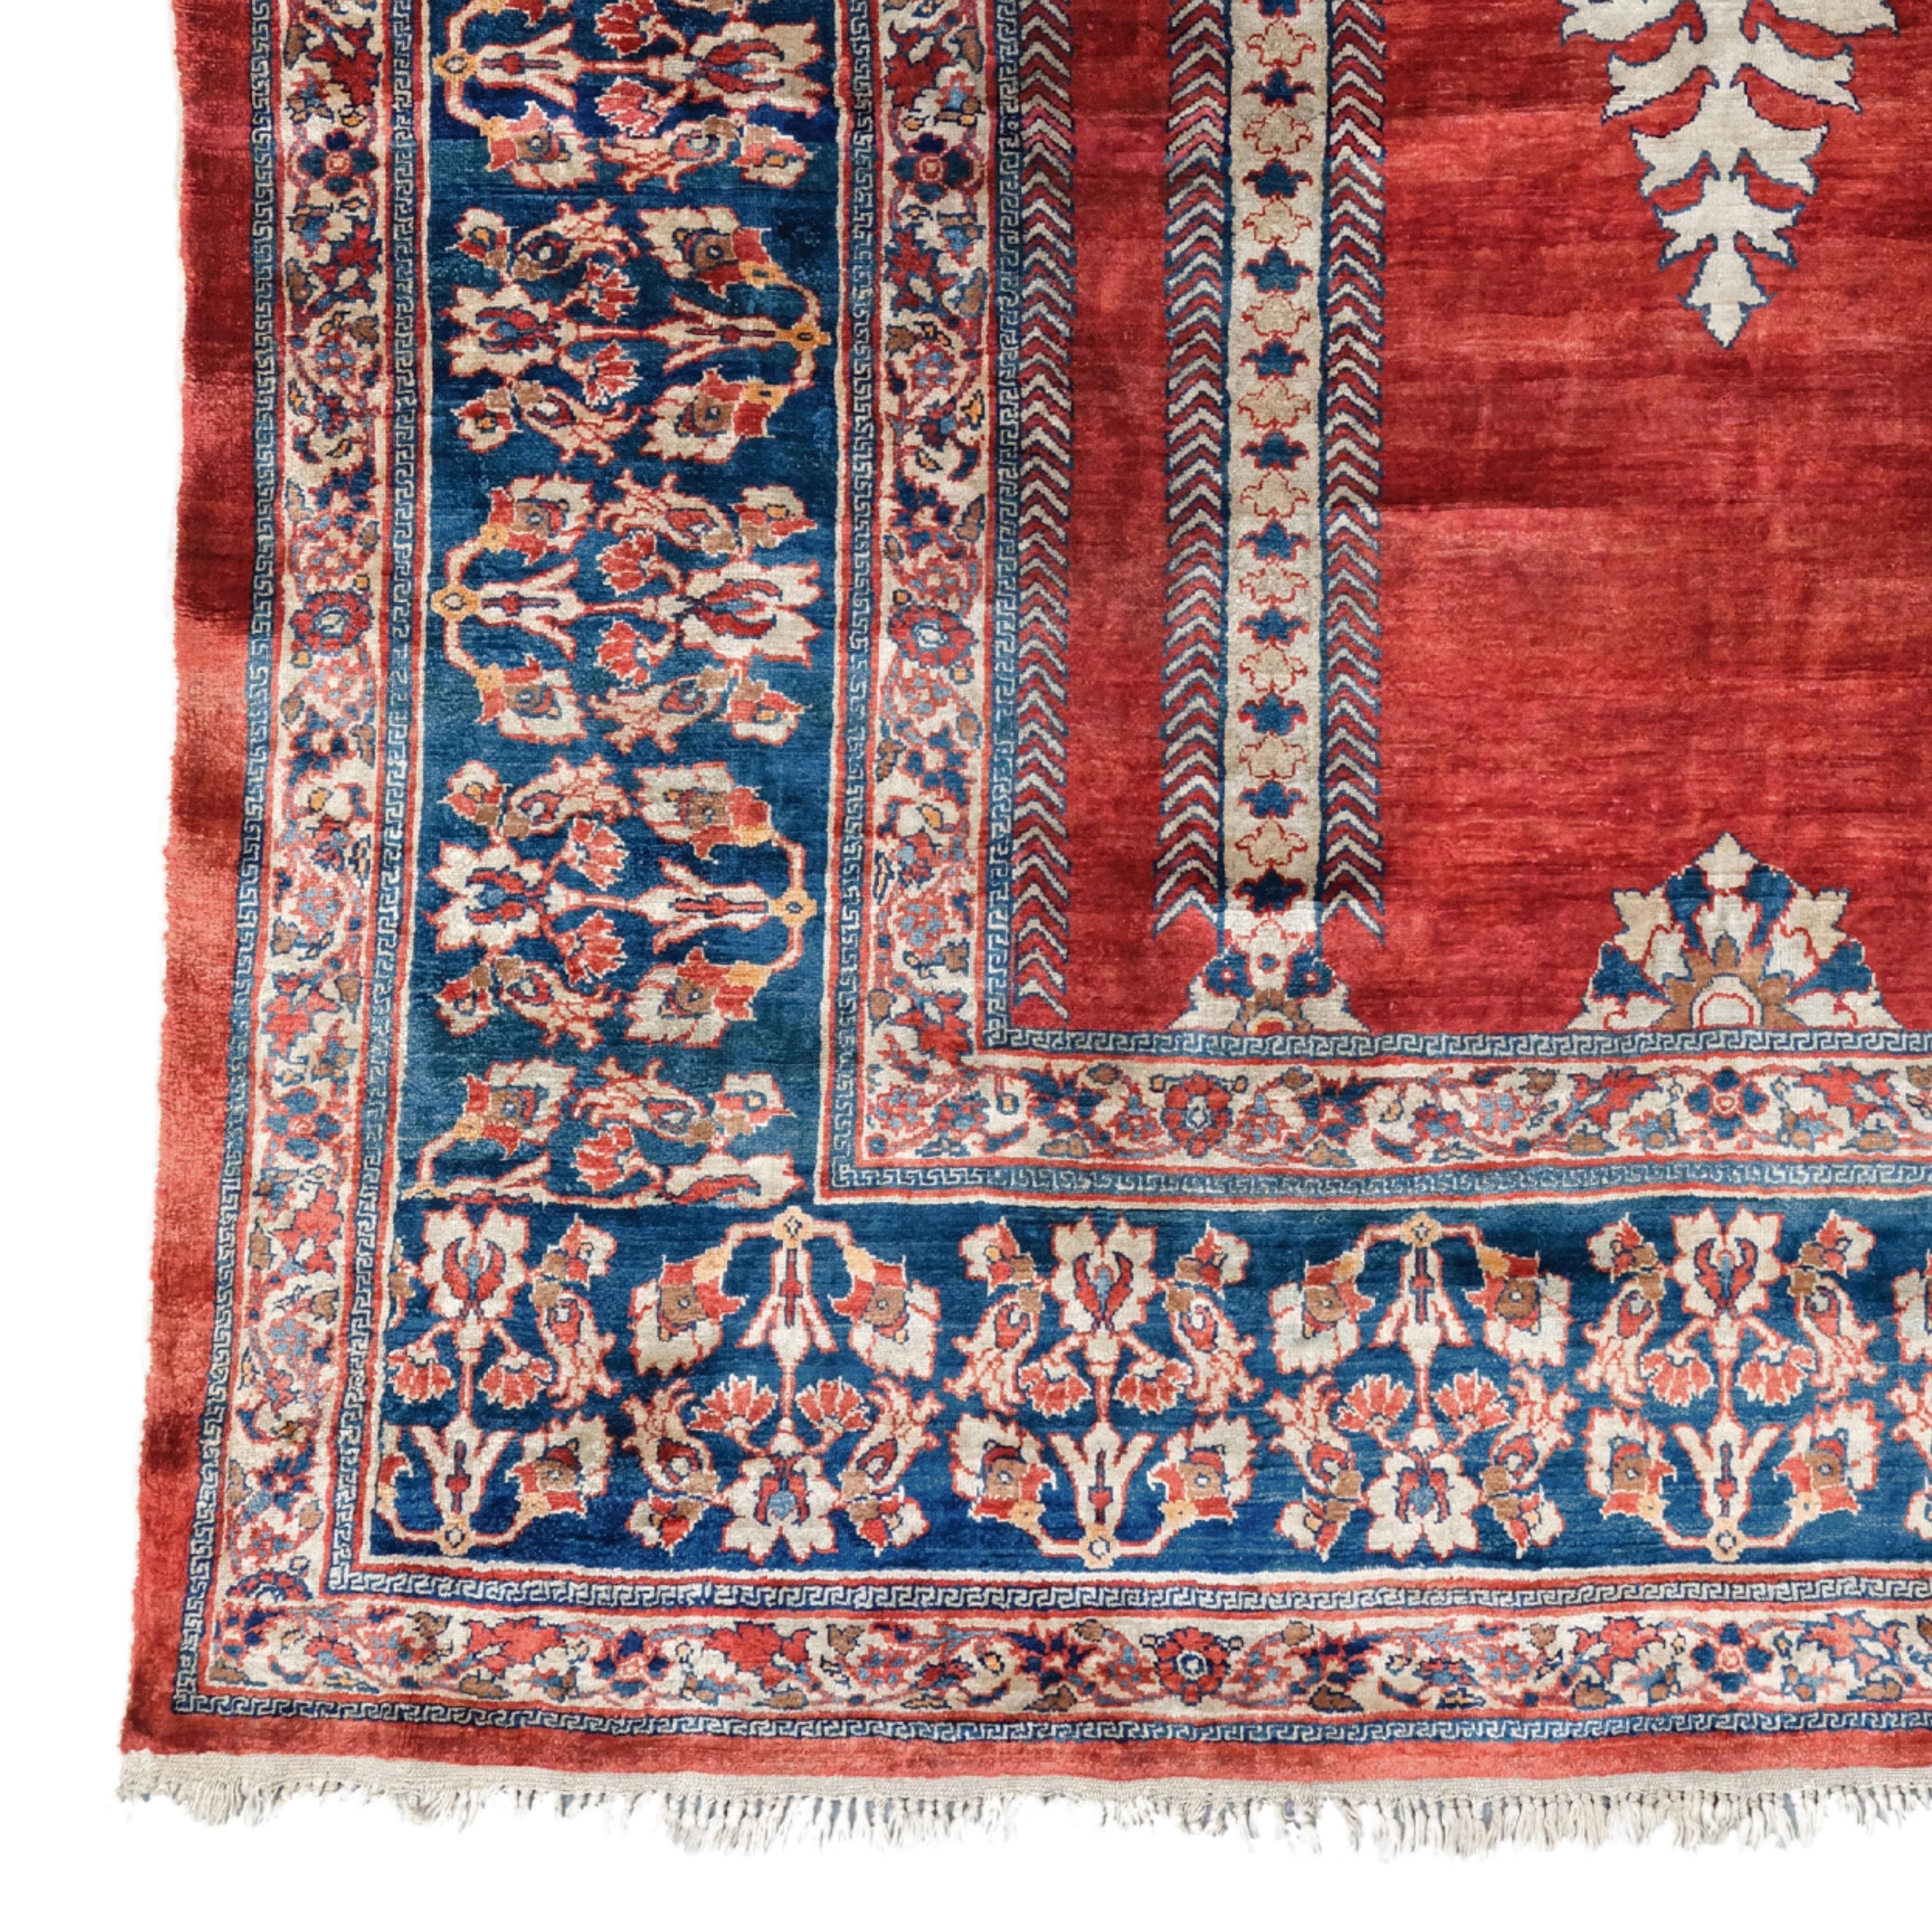 Late 19th Century Silk Heriz Rug
Size: 130x185 cm

This impressive late 19th-century Silk Heriz Carpet is a masterpiece reflecting the elegant and sophisticated craftsmanship of a historic period.

Rich Patterns: The carpet is decorated with